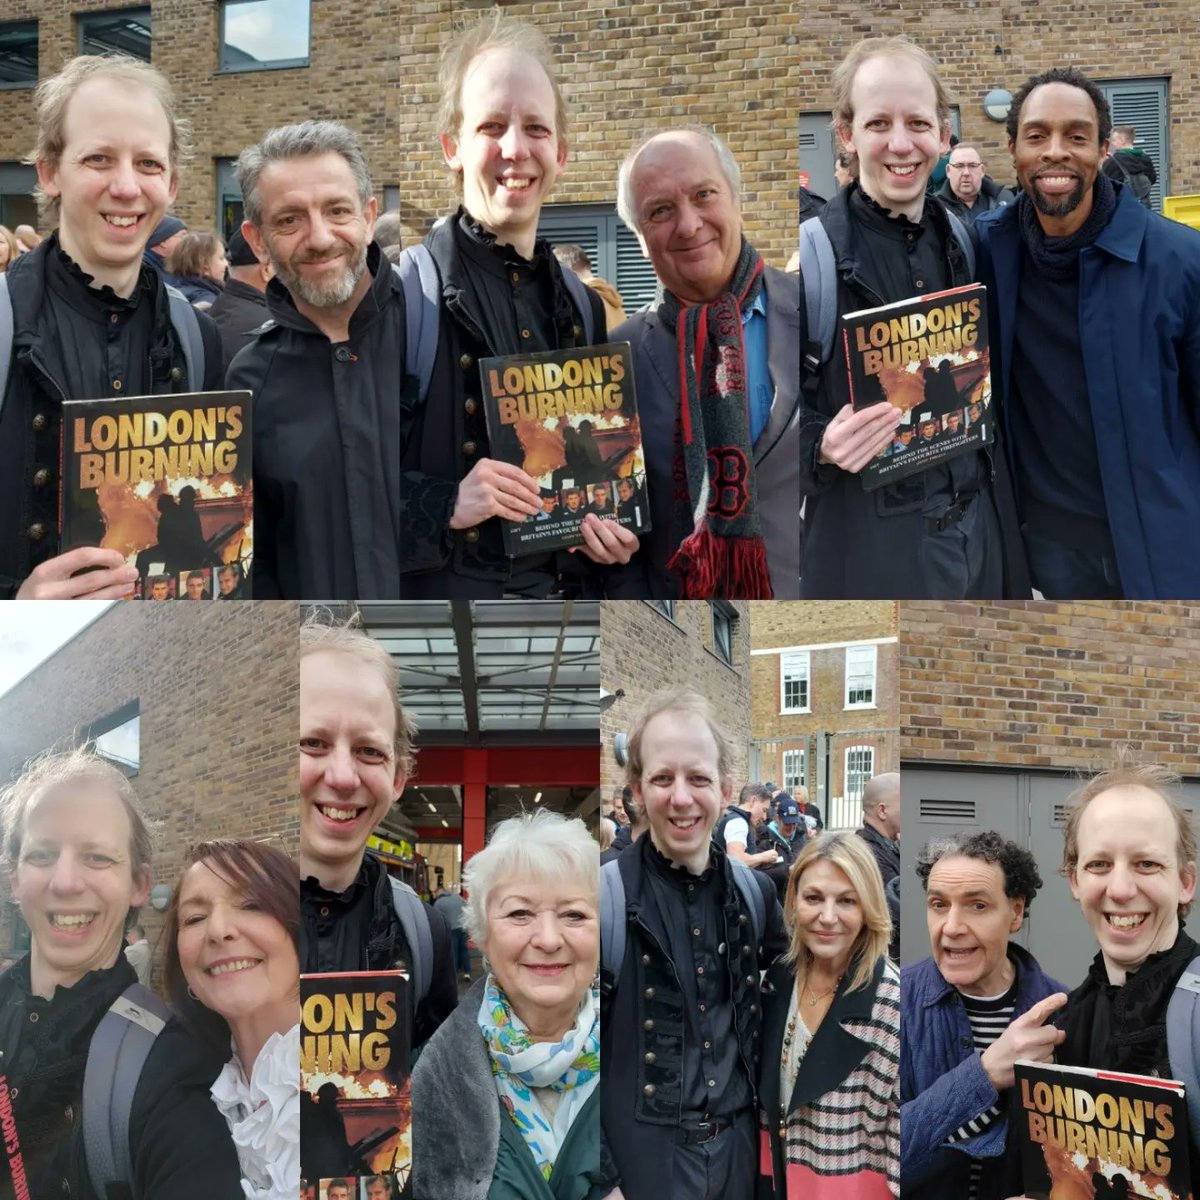 Yesterday was packed but really lovely day in London. Firstly to #DockheadFireStation to meet several cast of #LondonsBurning. Then to see the performance of #TheMousetrap where we met #MilesRichardson aka #Gallifrey #Braxiatel and an added bonus round the corner, #MarkGatiss.